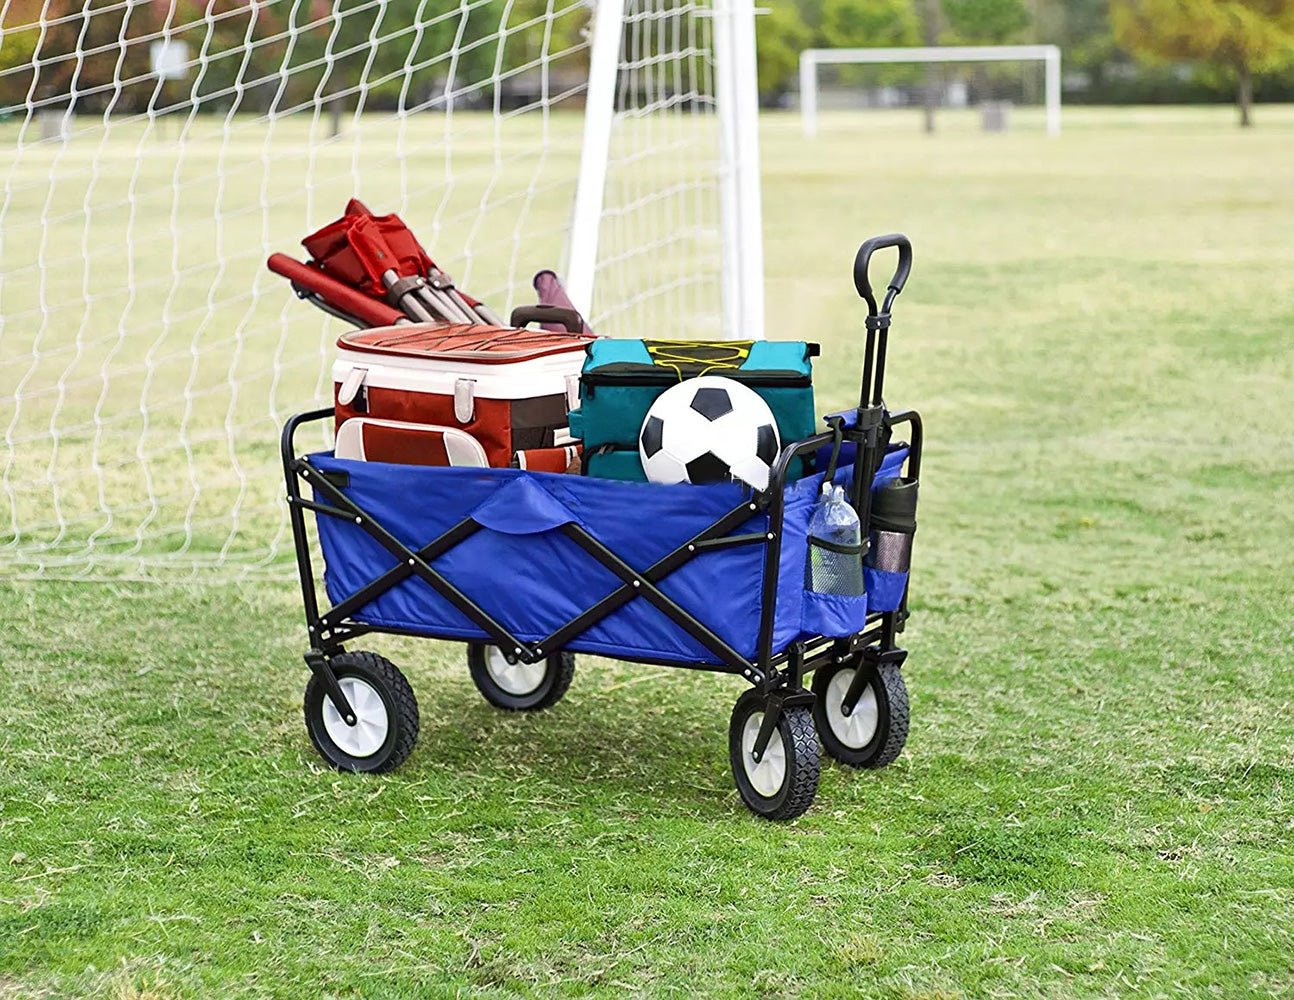 CRONY TC3015 Folding Cart Heavy Duty Collapsible Folding Wagon Utility Shopping Outdoor Camping Garden Cart | RED - Edragonmall.com